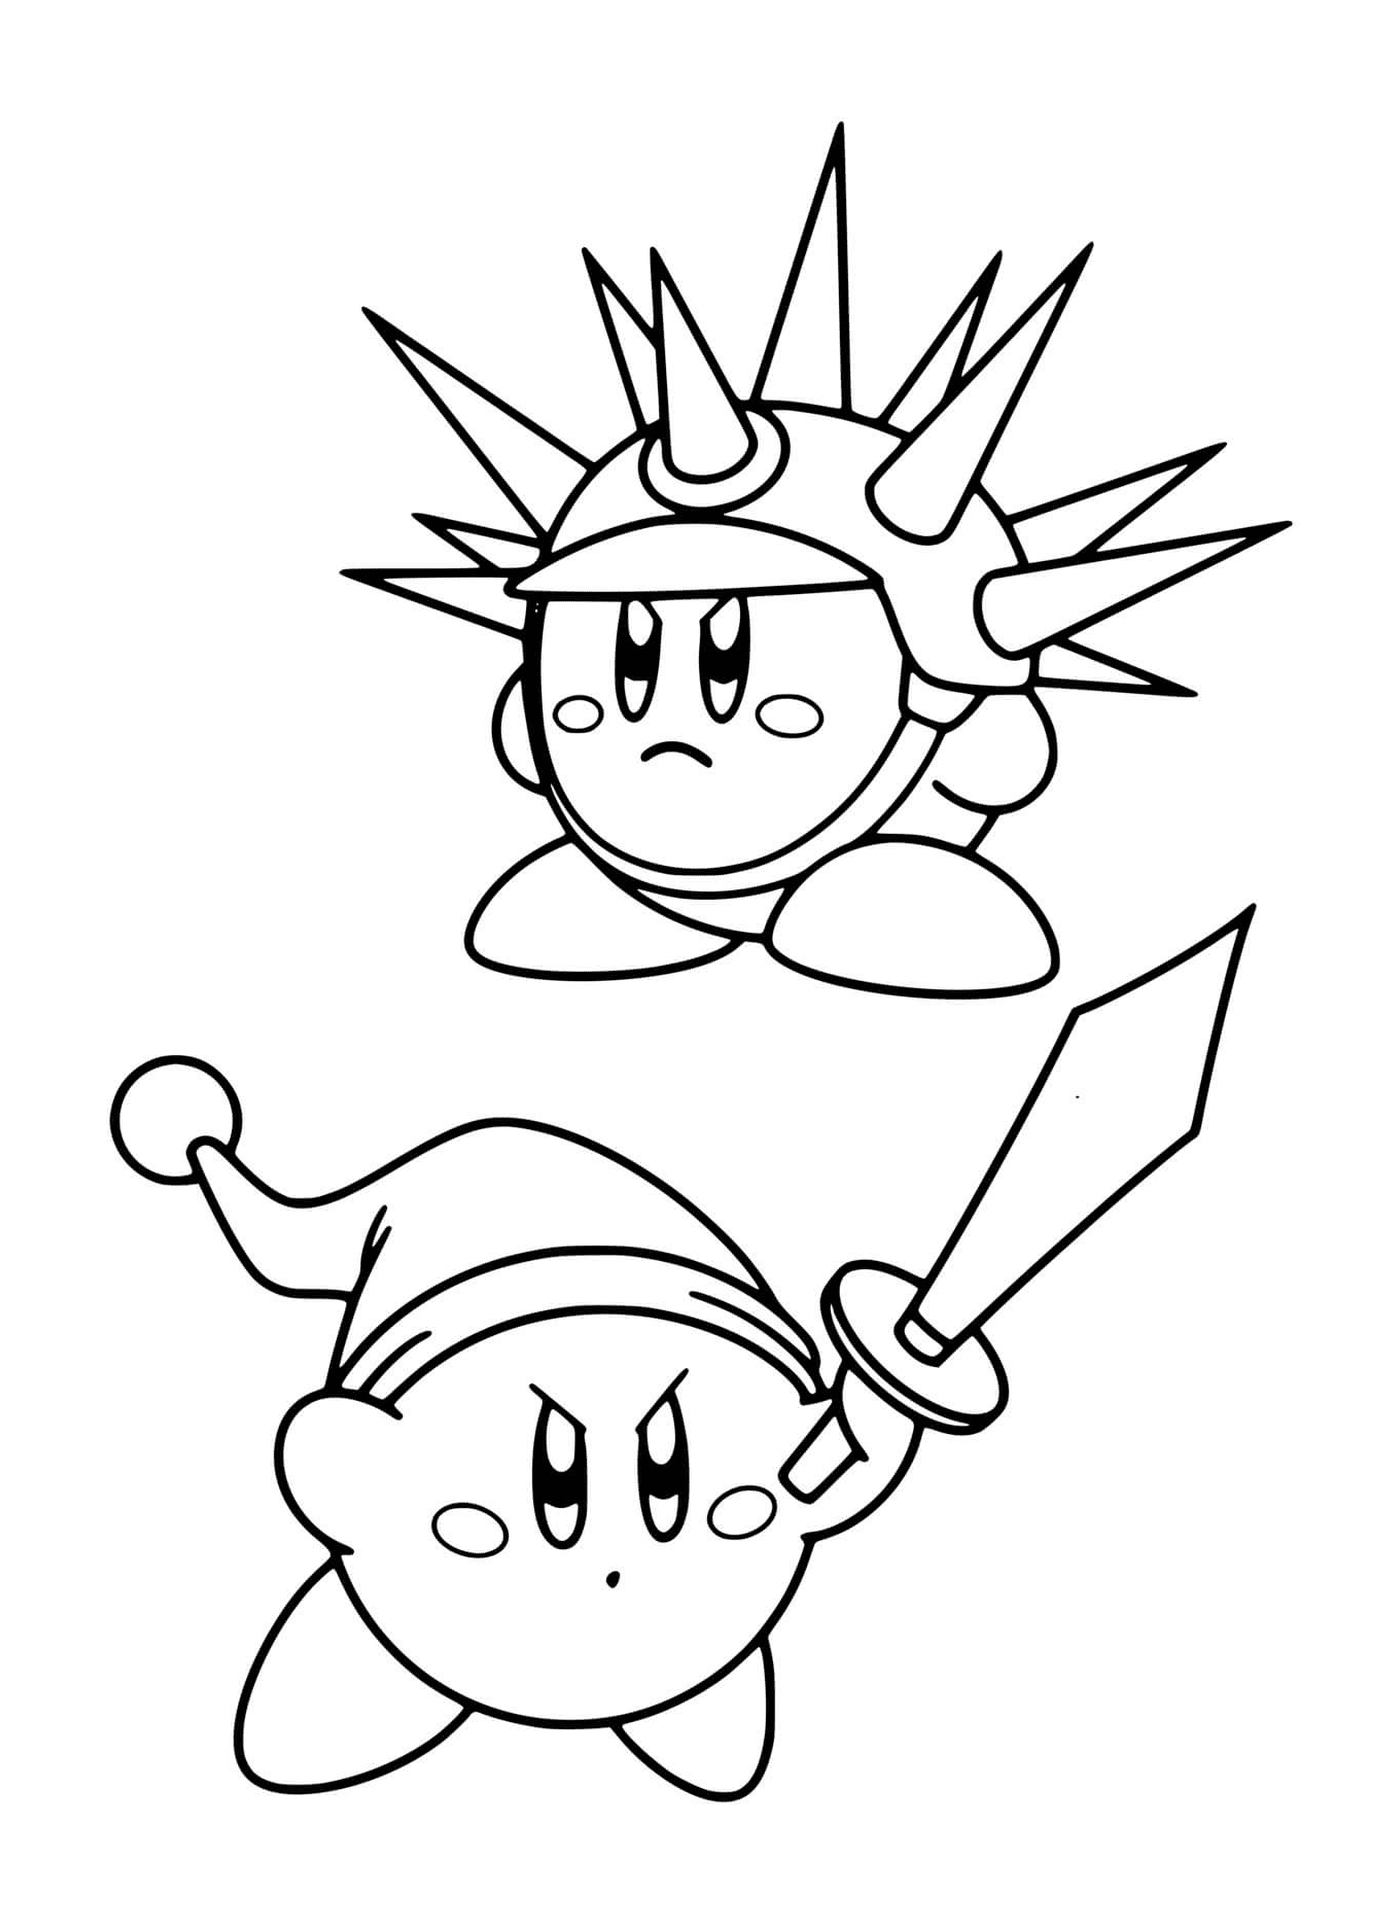  Dos personajes de Kirby Fighters 2 